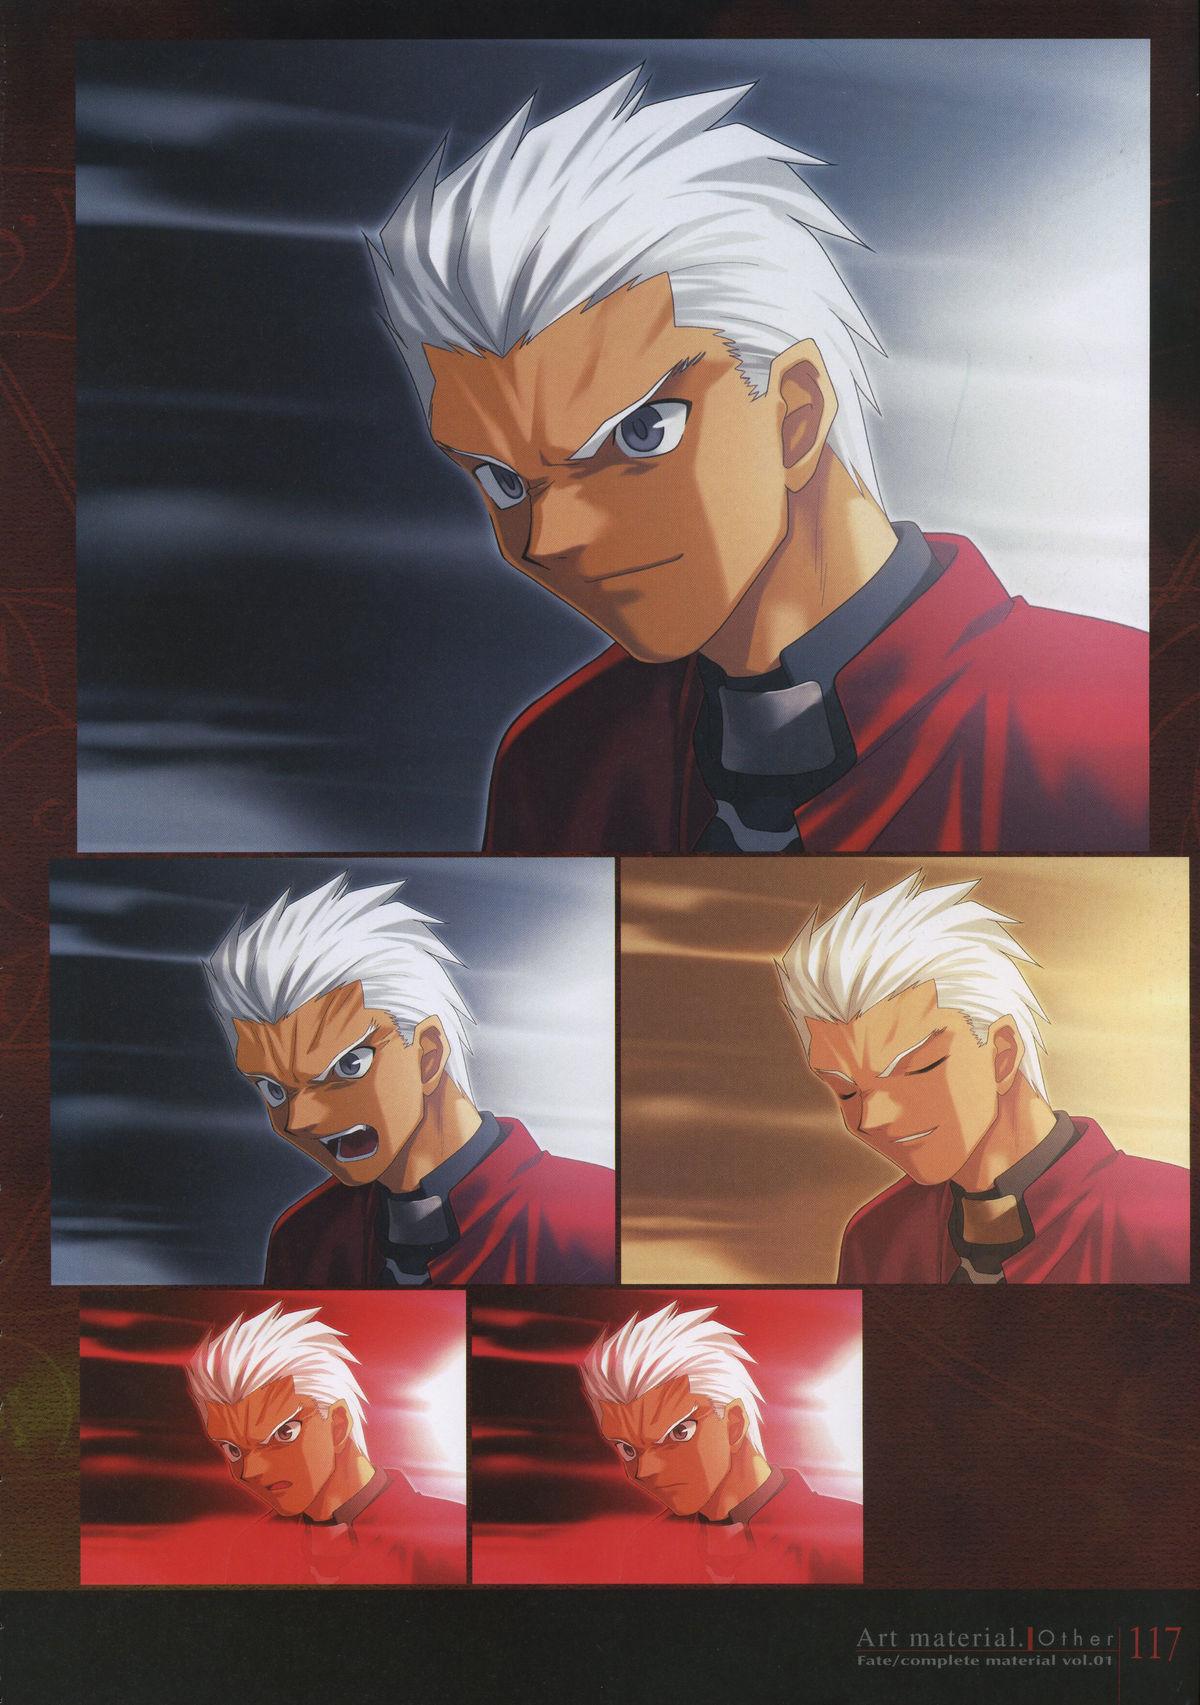 Fate/complete material I - Art material. 121